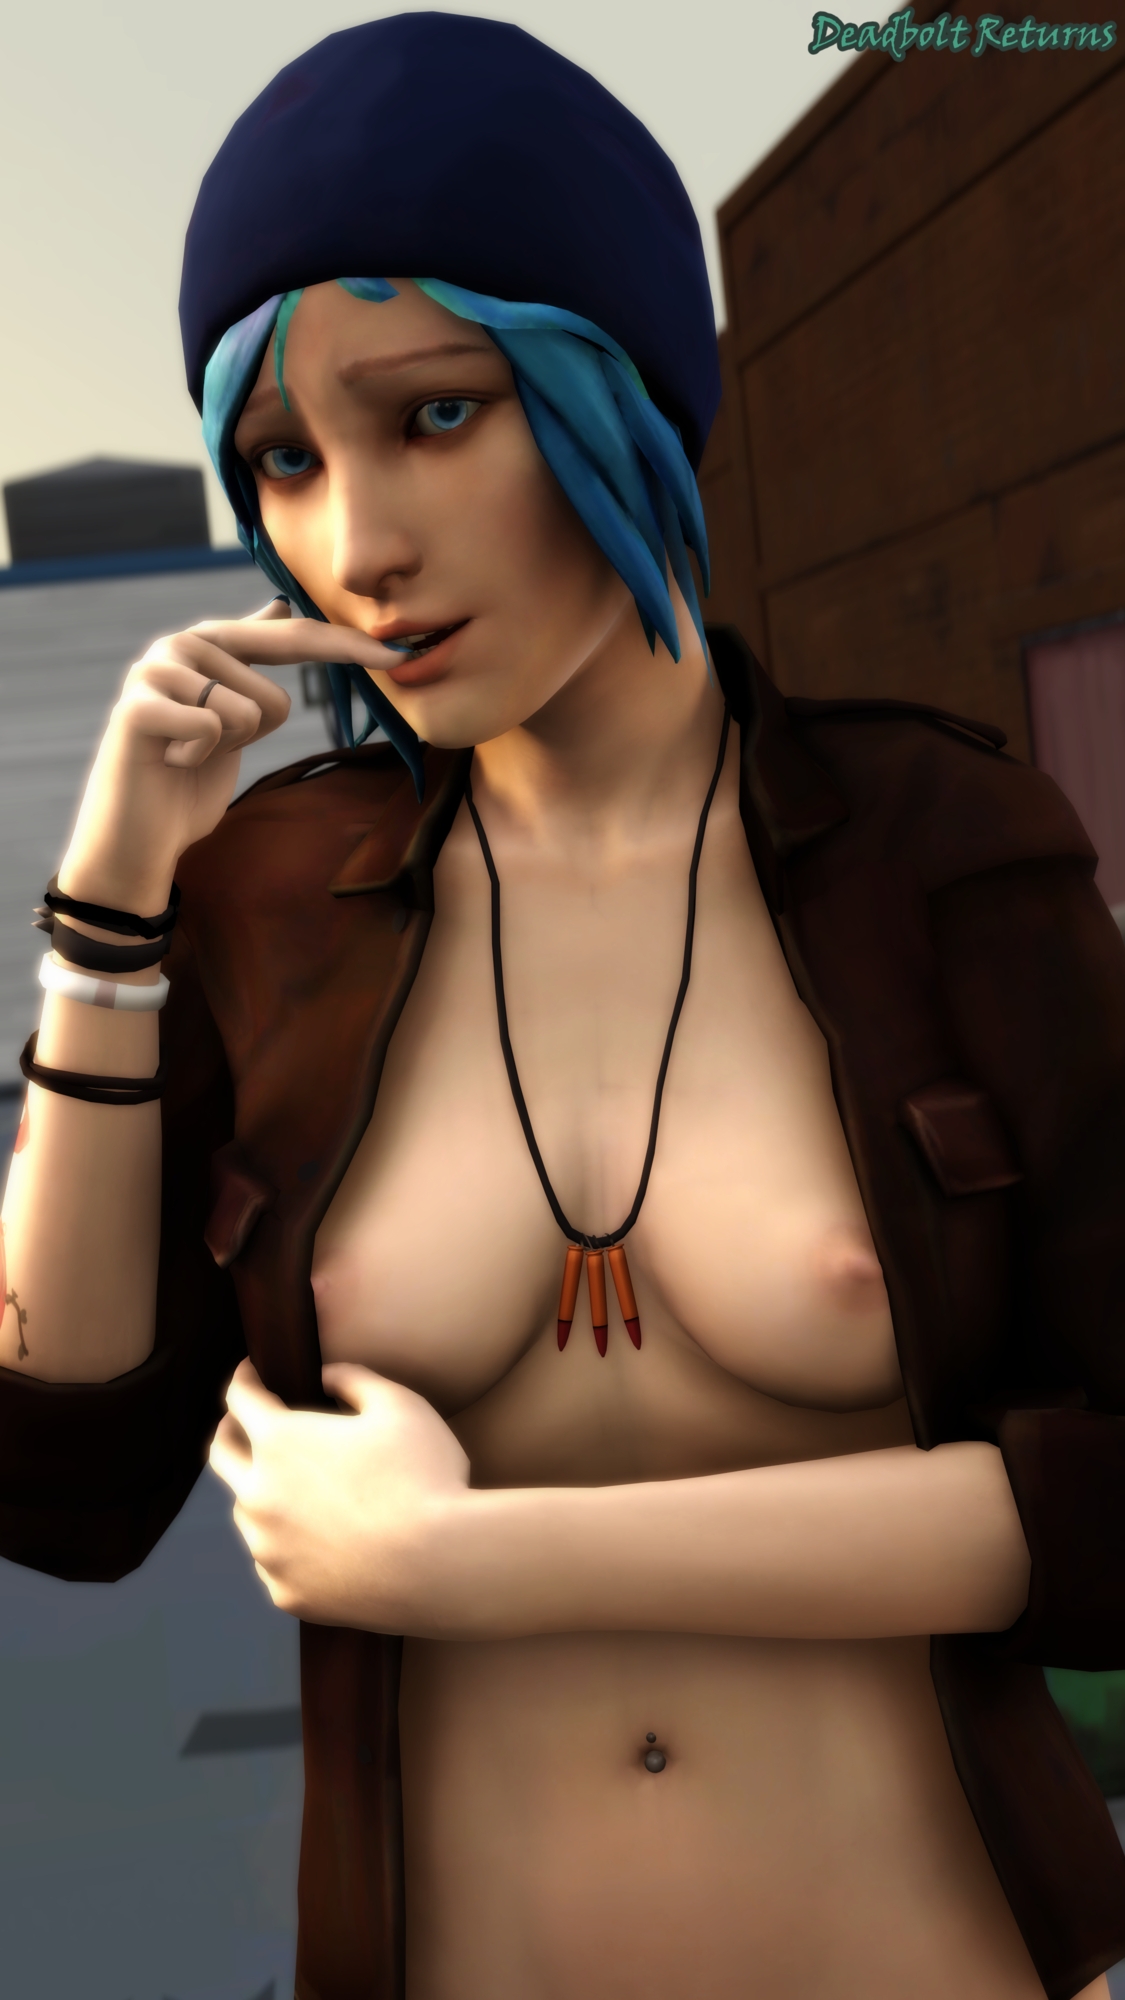 Chloe Back Alley Photoshoot Chloe Price Chloe Life Is Strange Sfm Source Filmmaker Nsfw 3dnsfw 3d Porn 3d Girl Nude Nudes In The Nude Partially_nude Solo Pinup 4